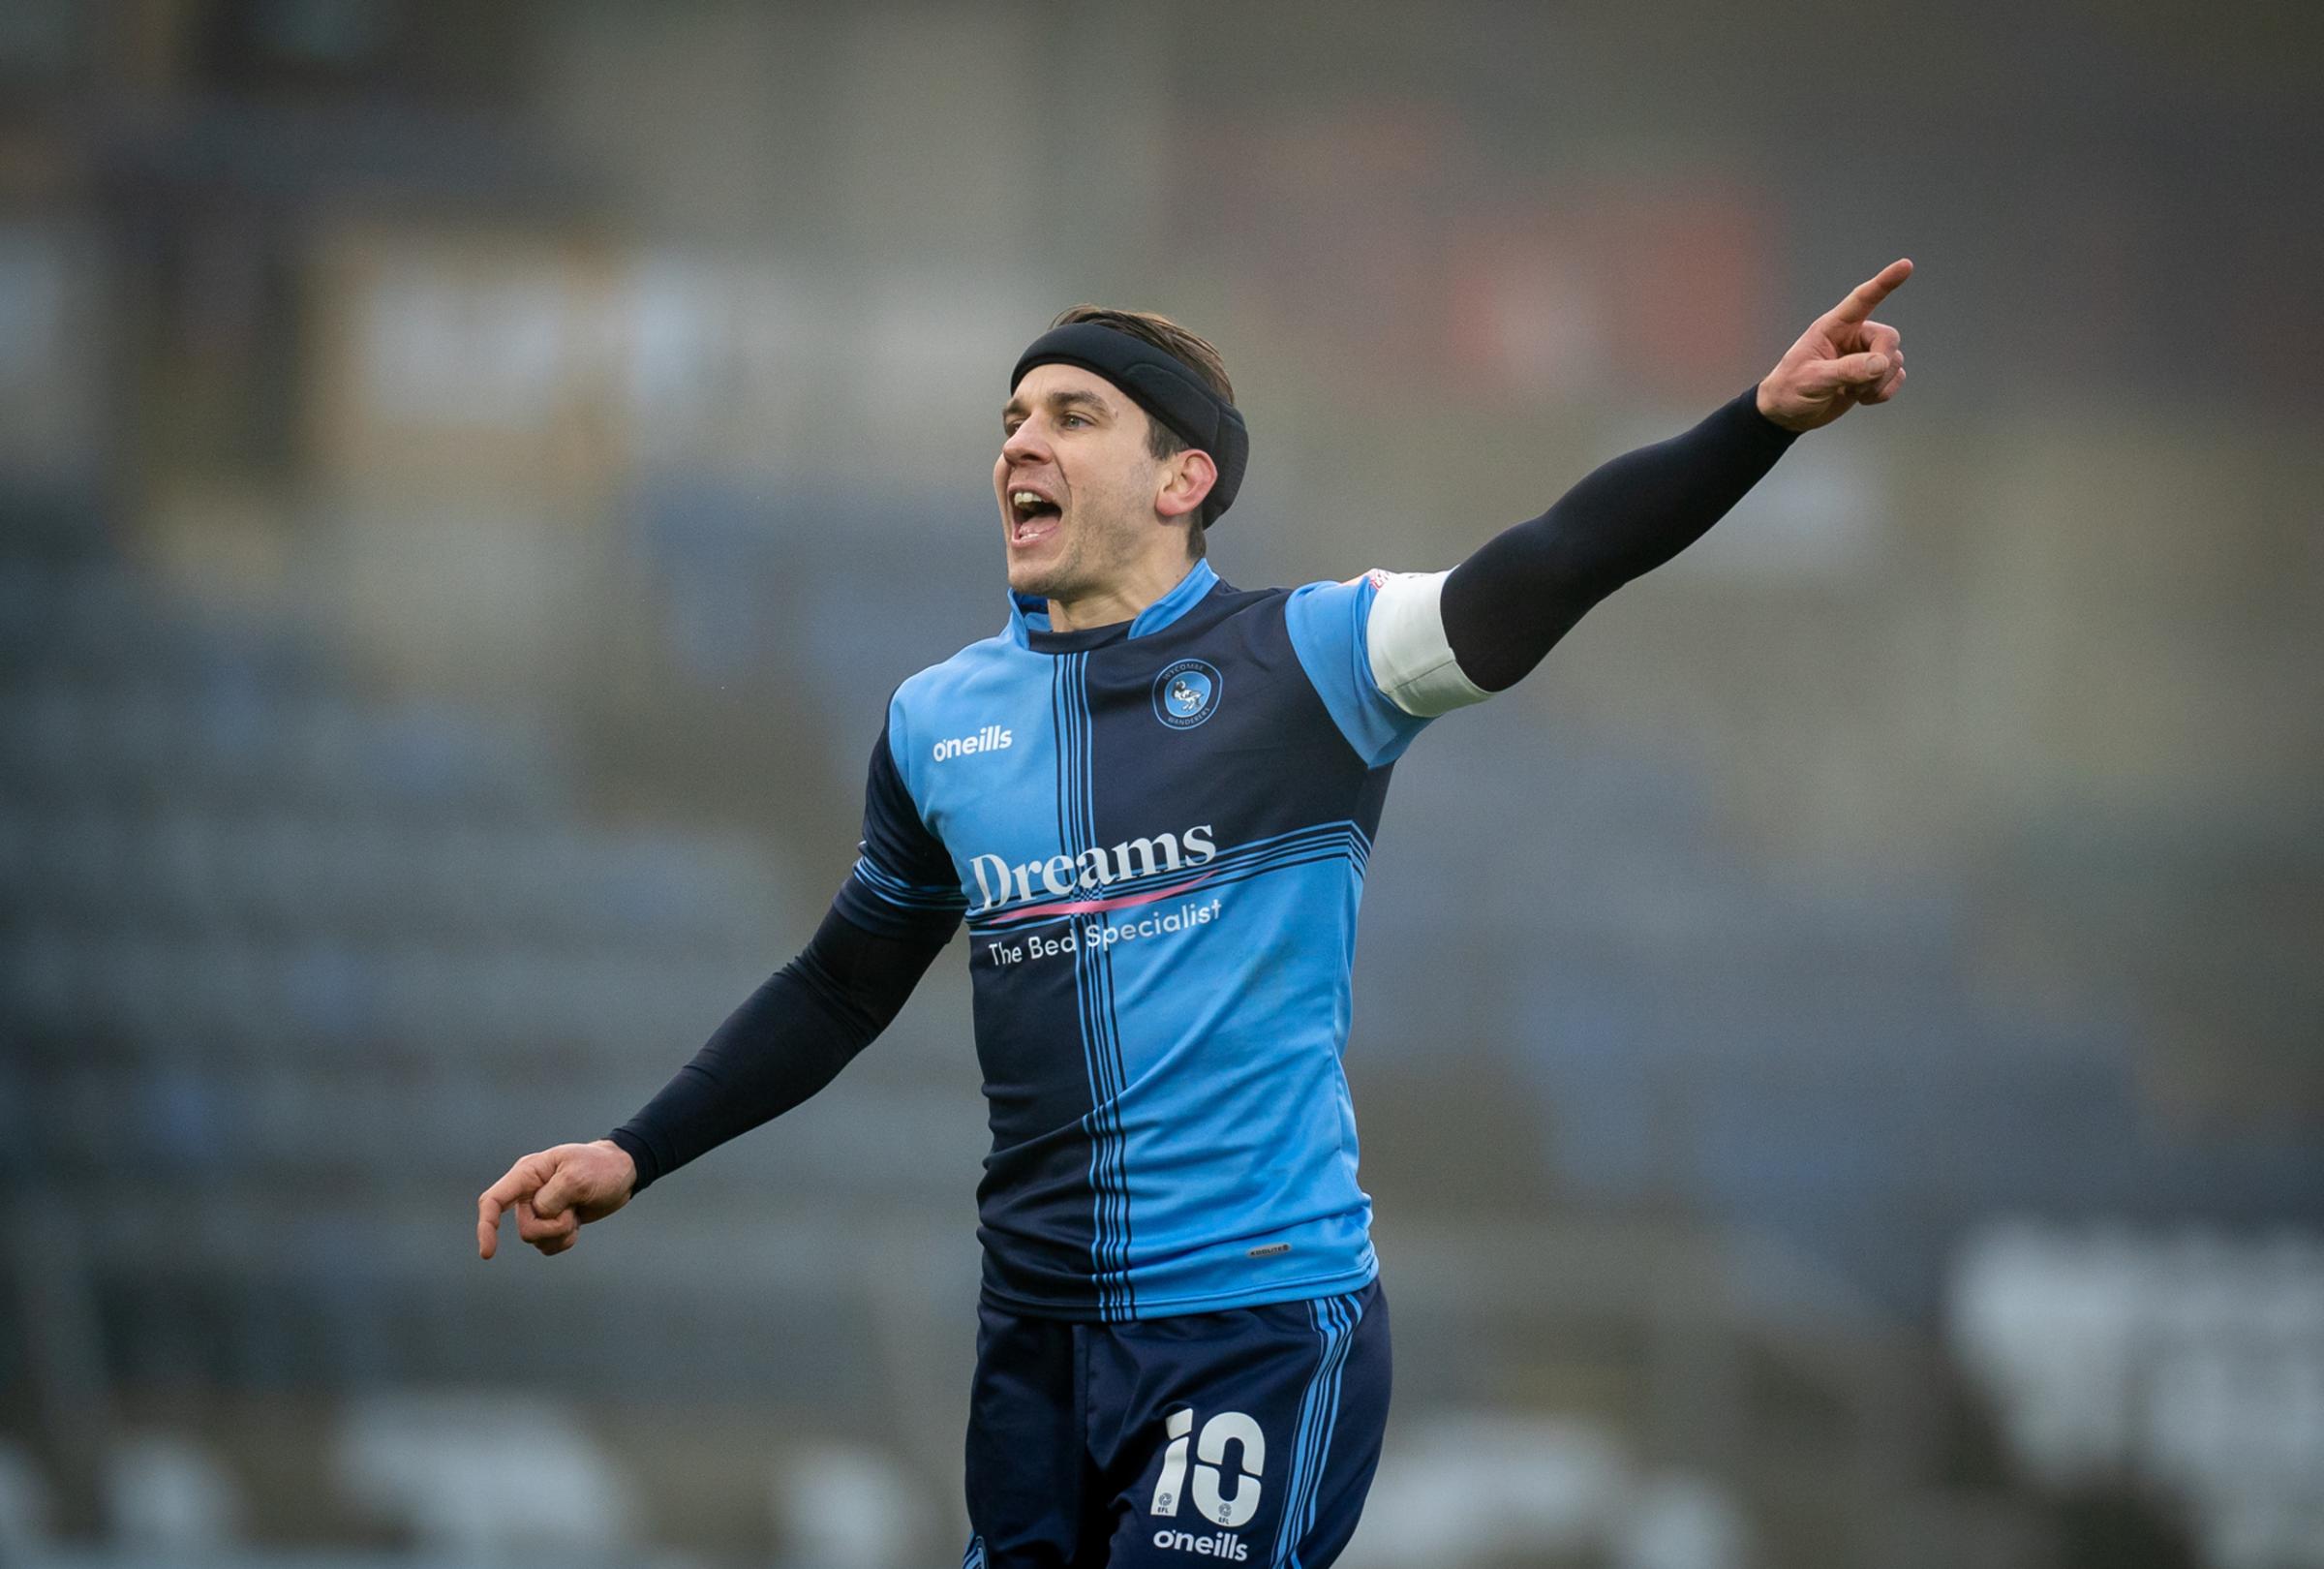 Matt Bloomfield played 19 matches this season across three competitions, scoring once. Here he is ordering his team in the 4-1 win against Preston North End in the FA Cup on January 9 (Adams Park) 